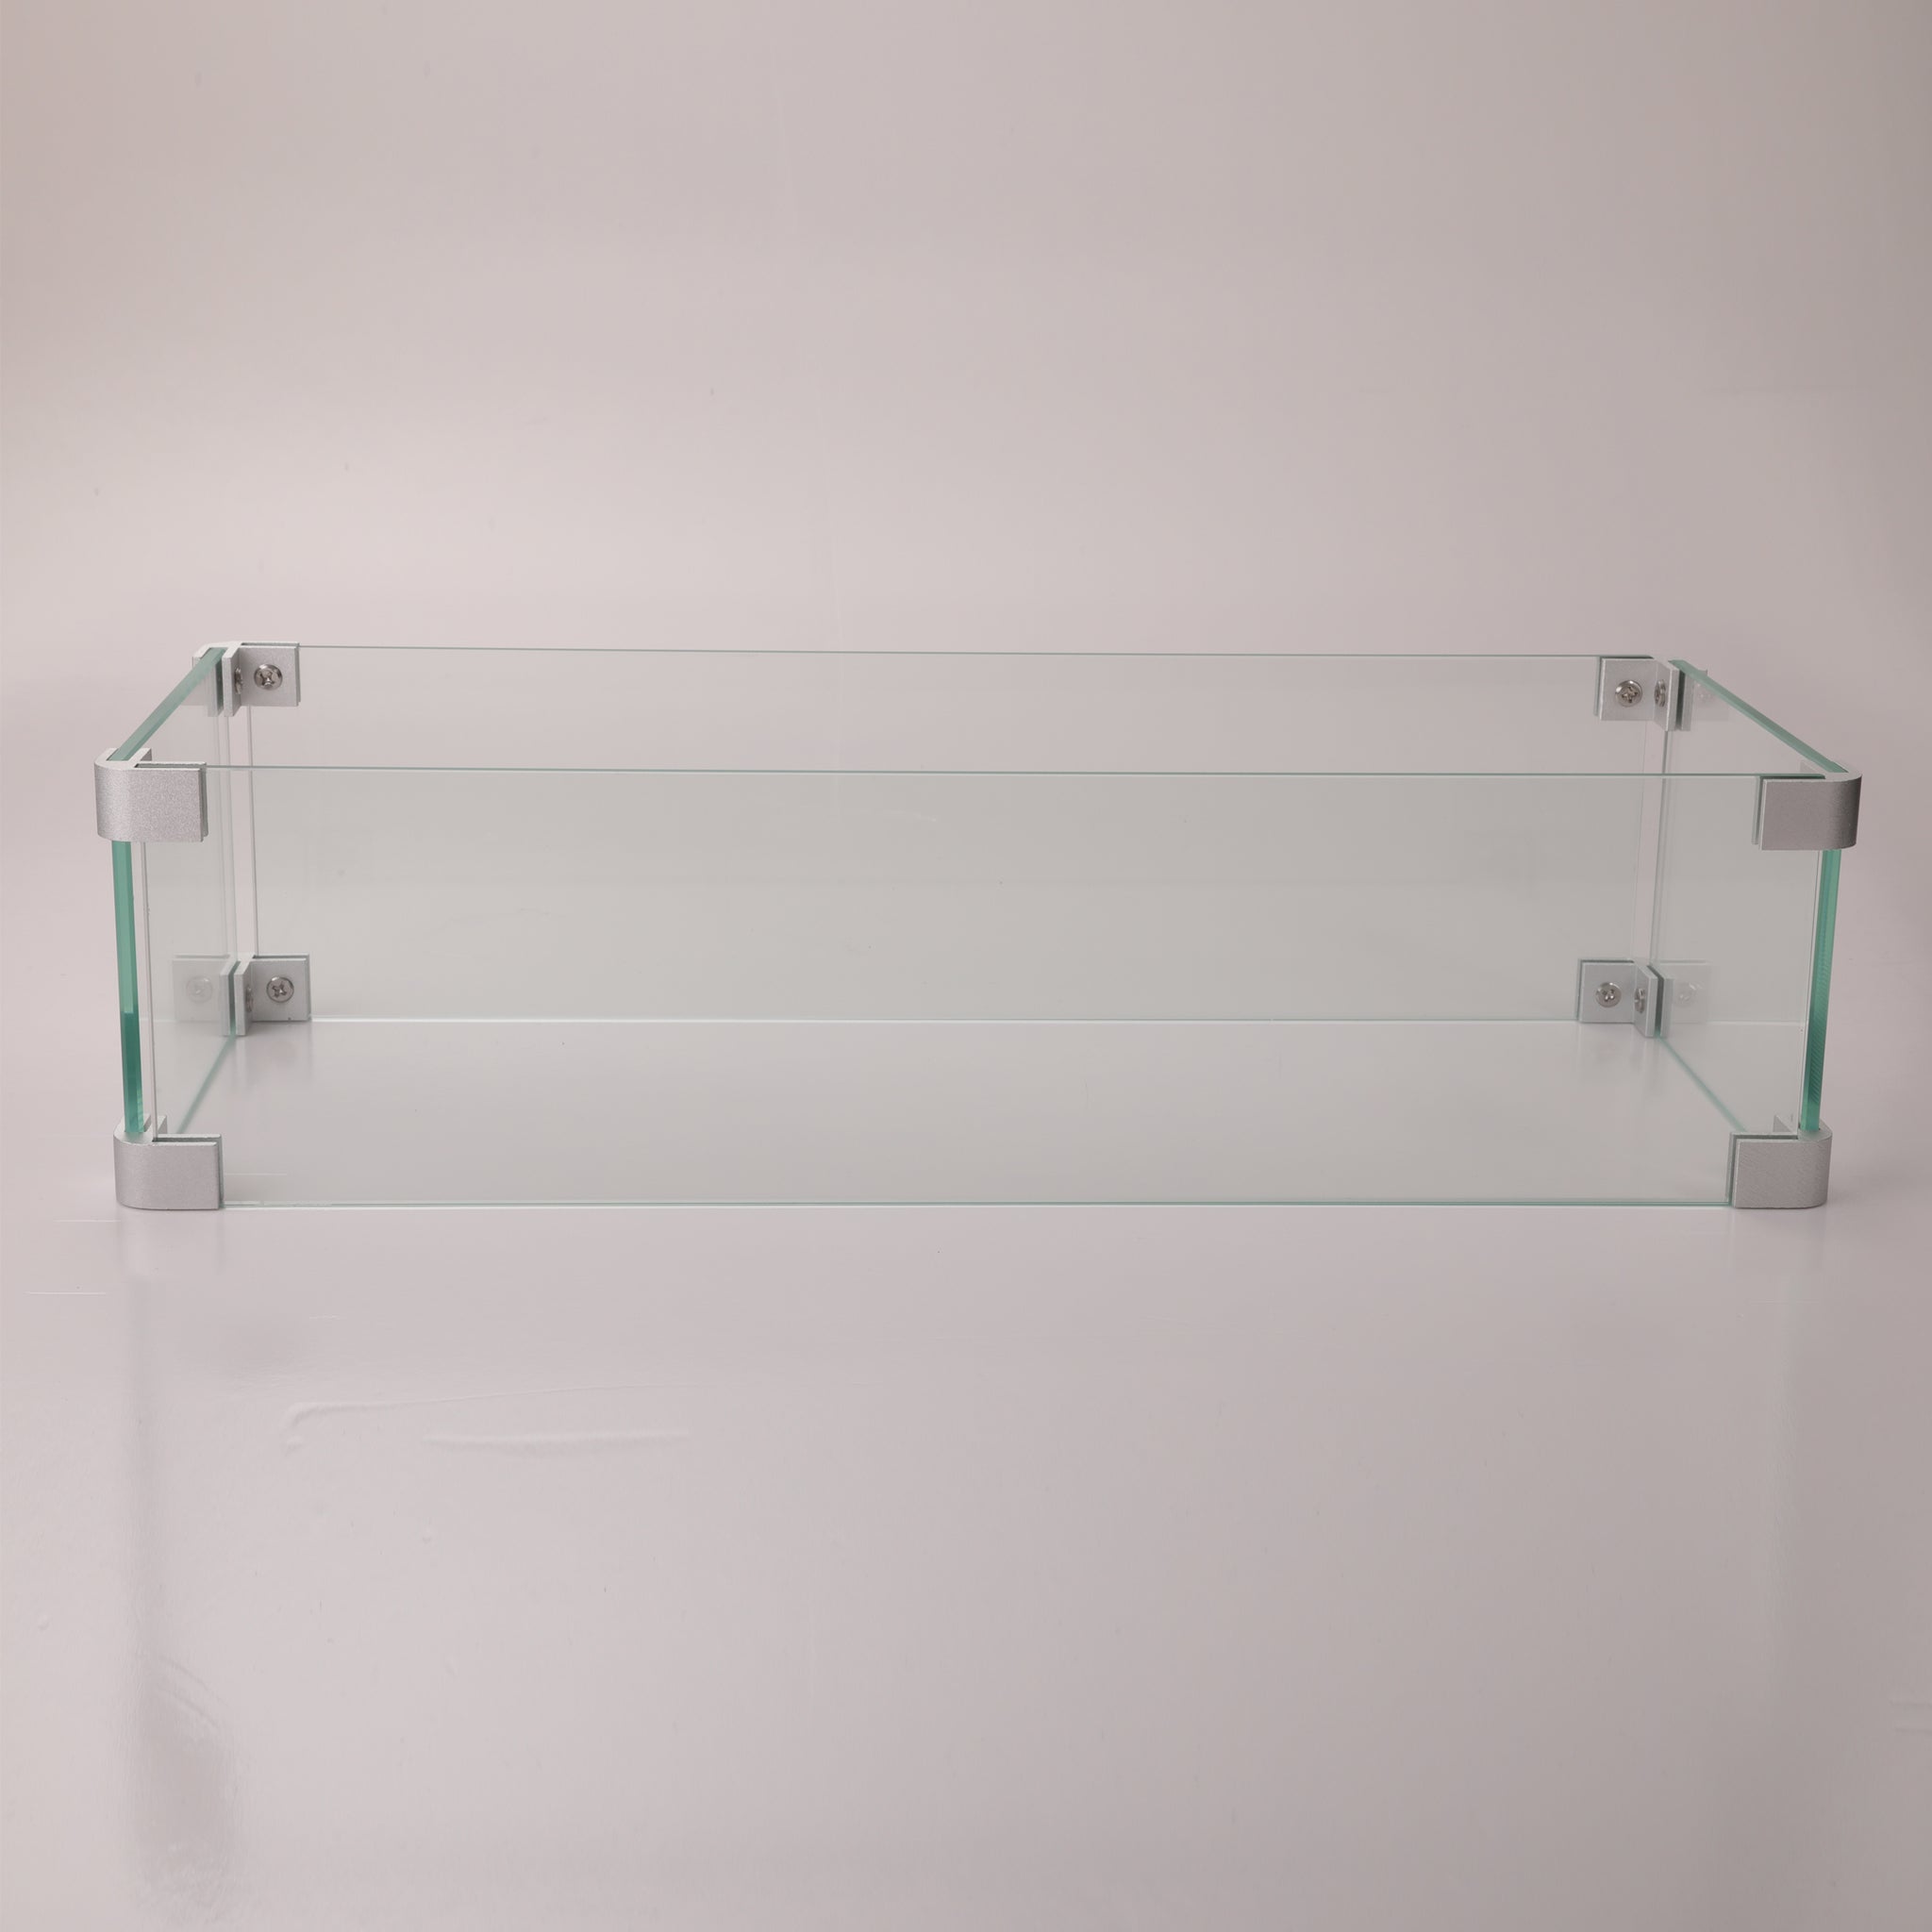 Rectangular Glass Wind Guard for Fire Pit